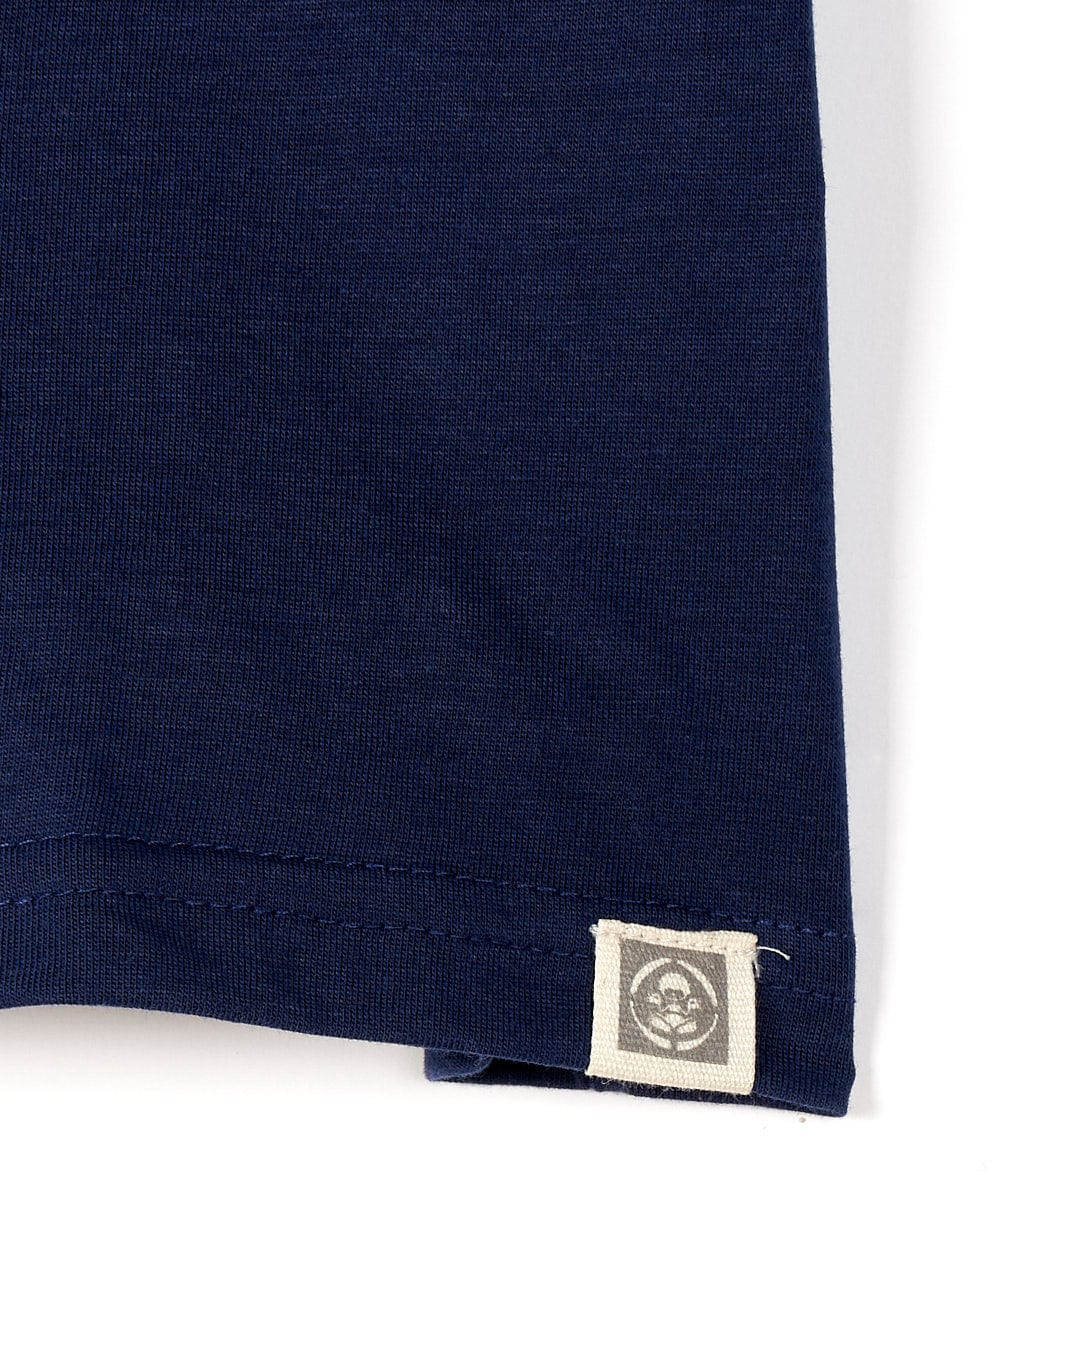 Close-up of a Saltrock Tok Stripe - Kids Short Sleeve T-Shirt in Dark Blue with a small square label showing a recycling symbol, stitched on the hem.